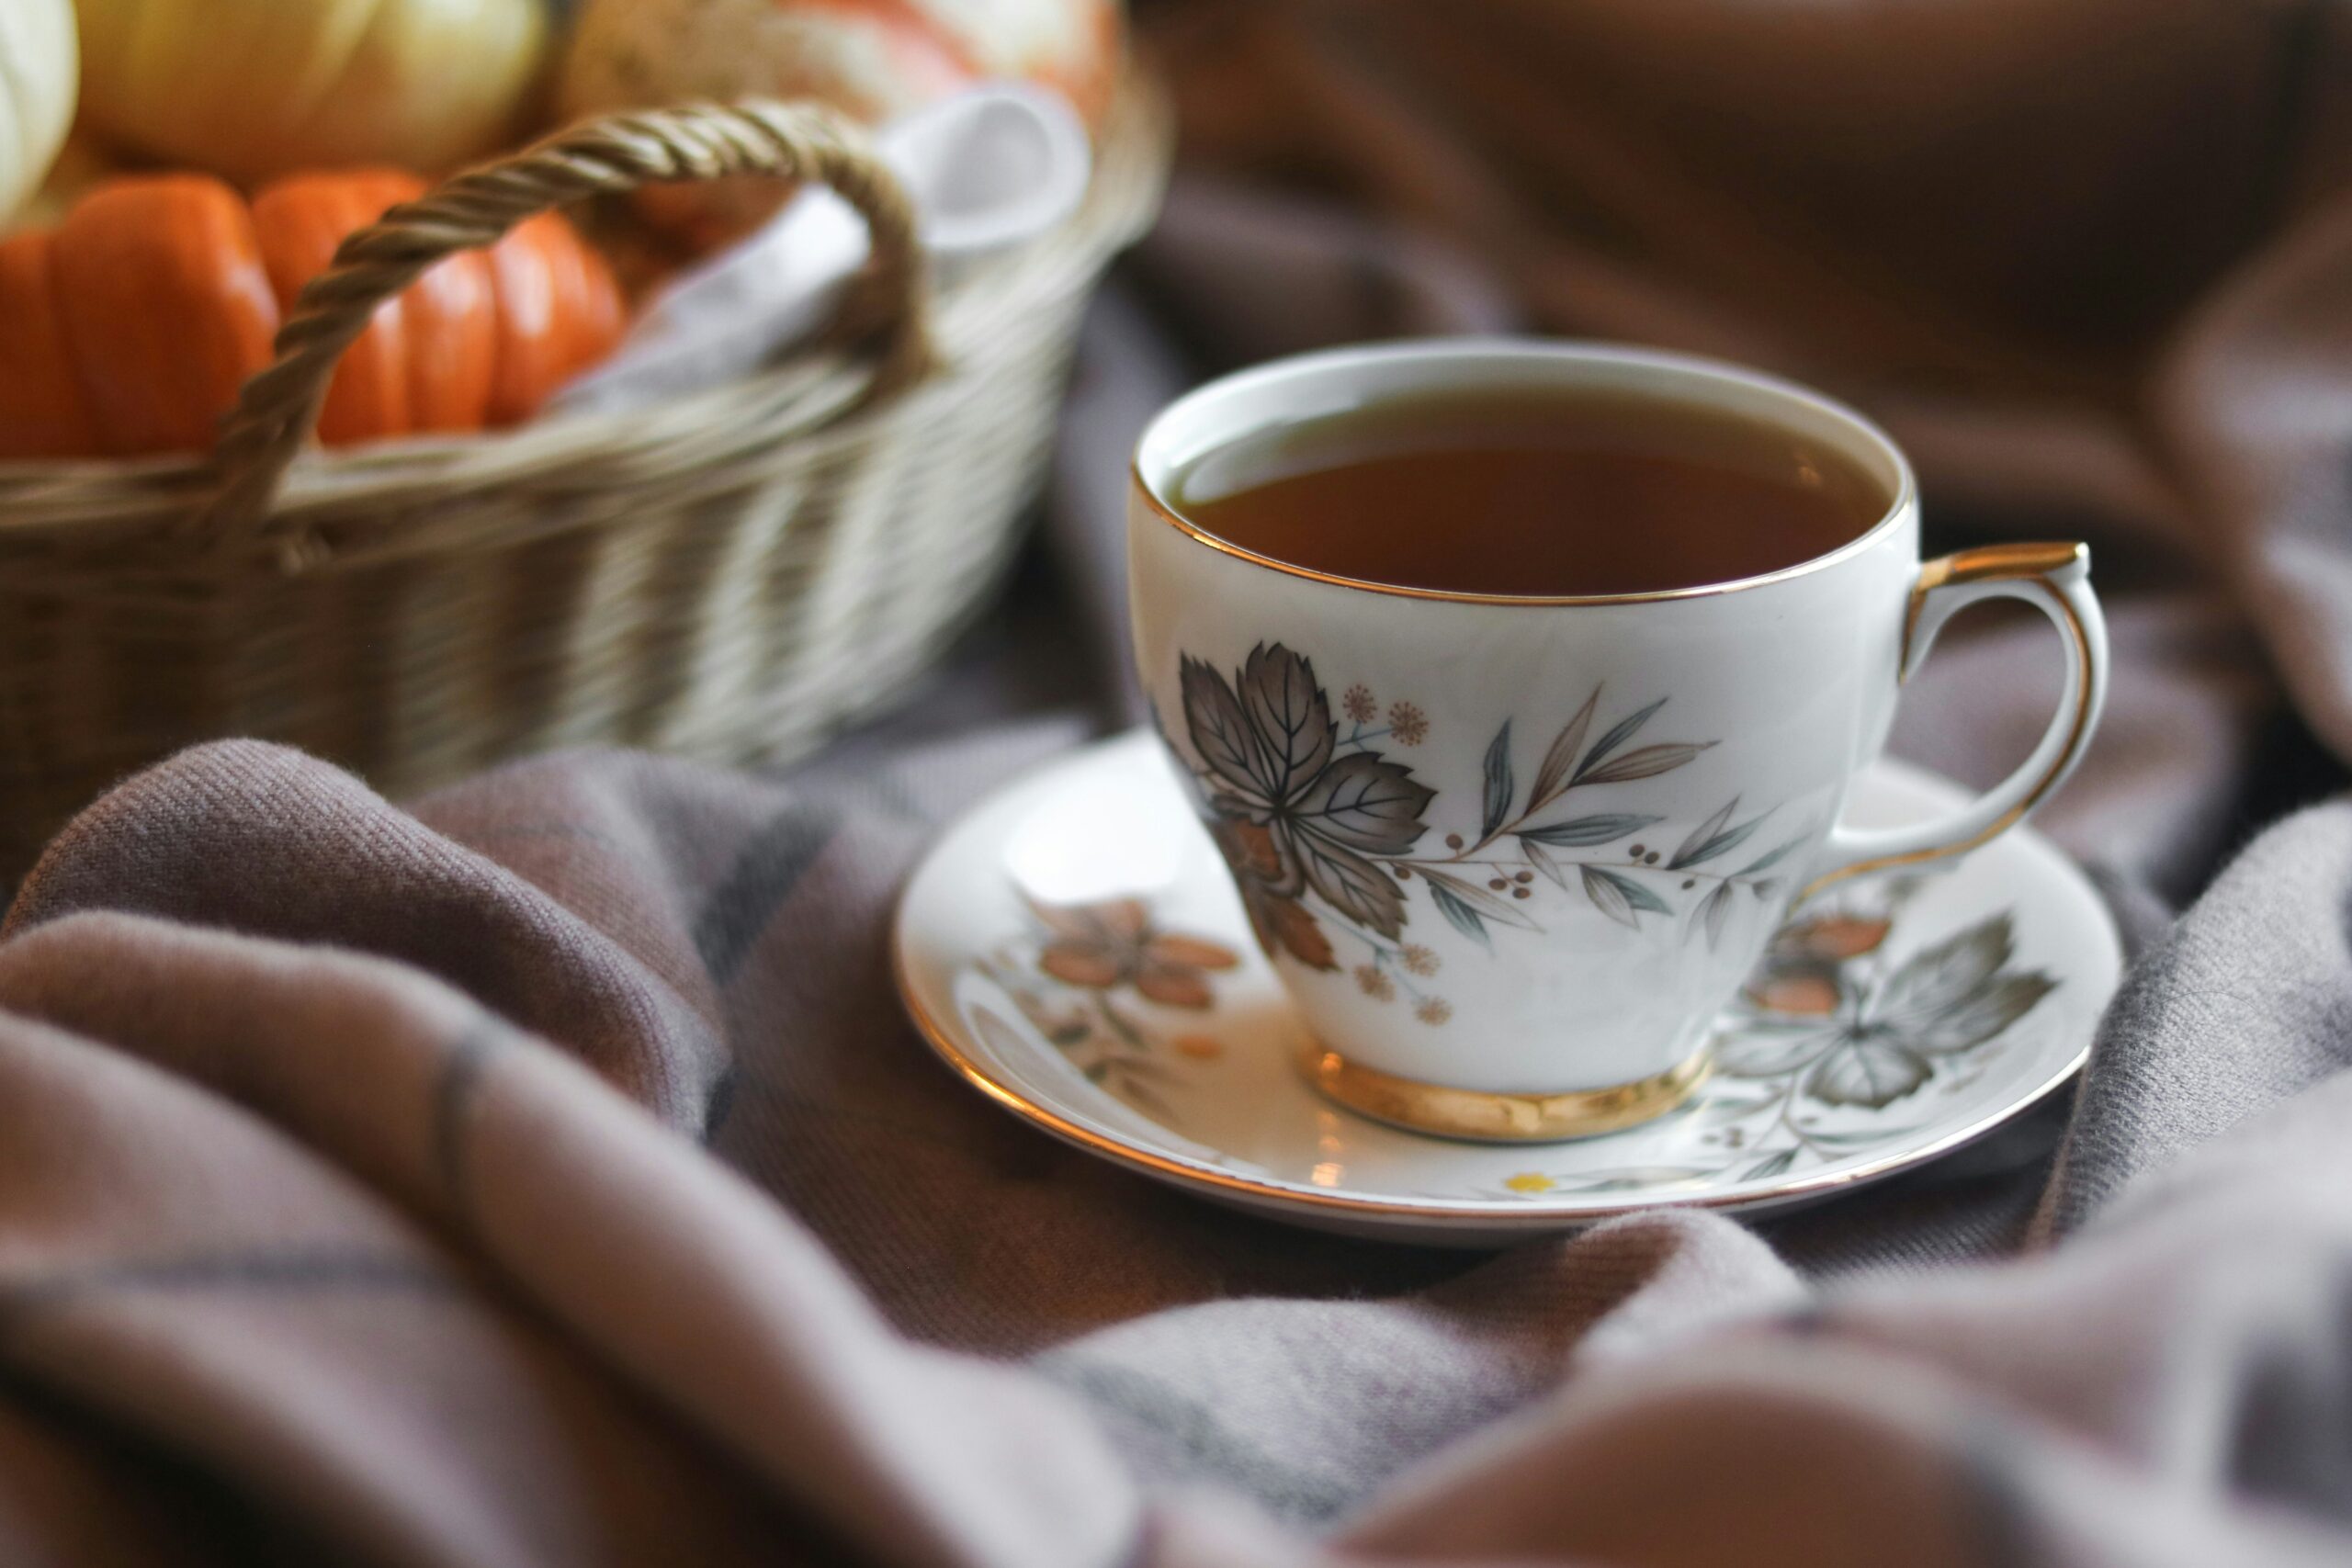 Use vintage decor to create a cottagecore aesthetic. Pictured: A vintage teacup with tea